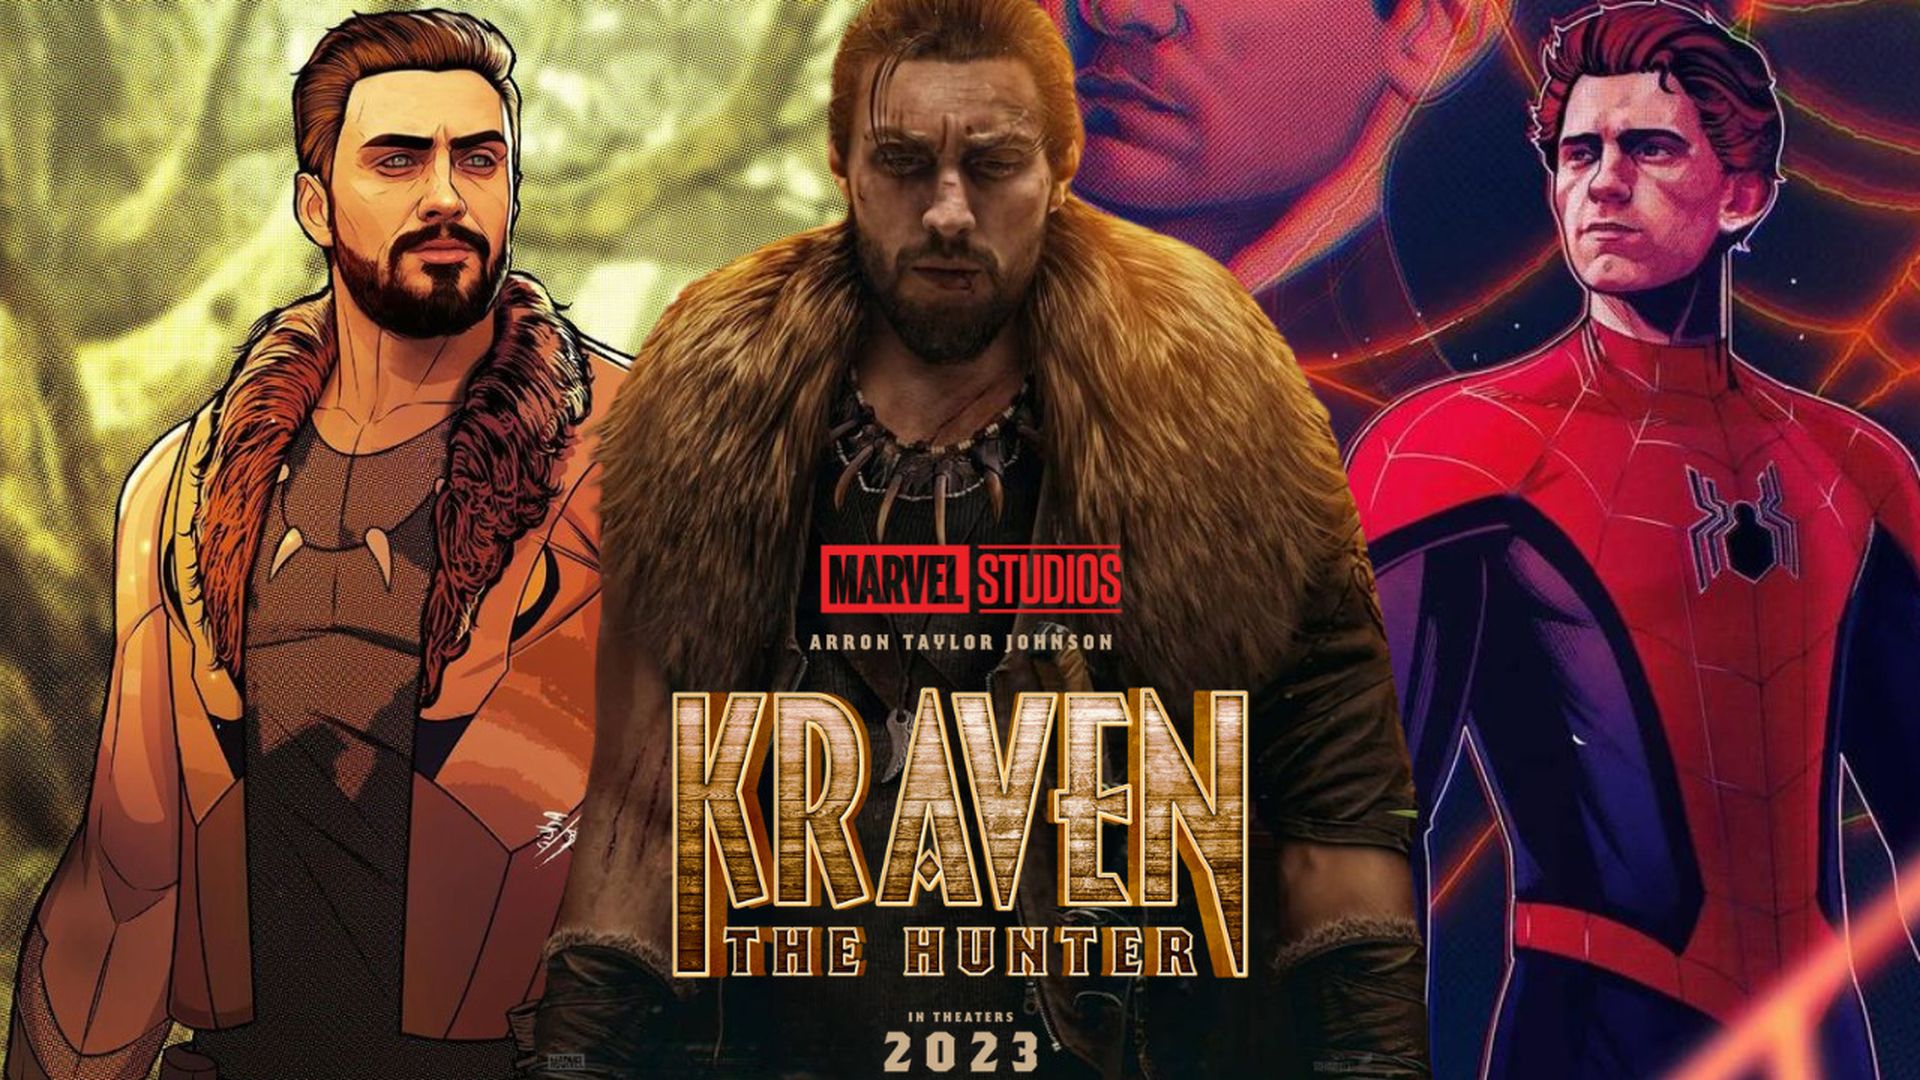 What Marvel movies are coming out in 2023